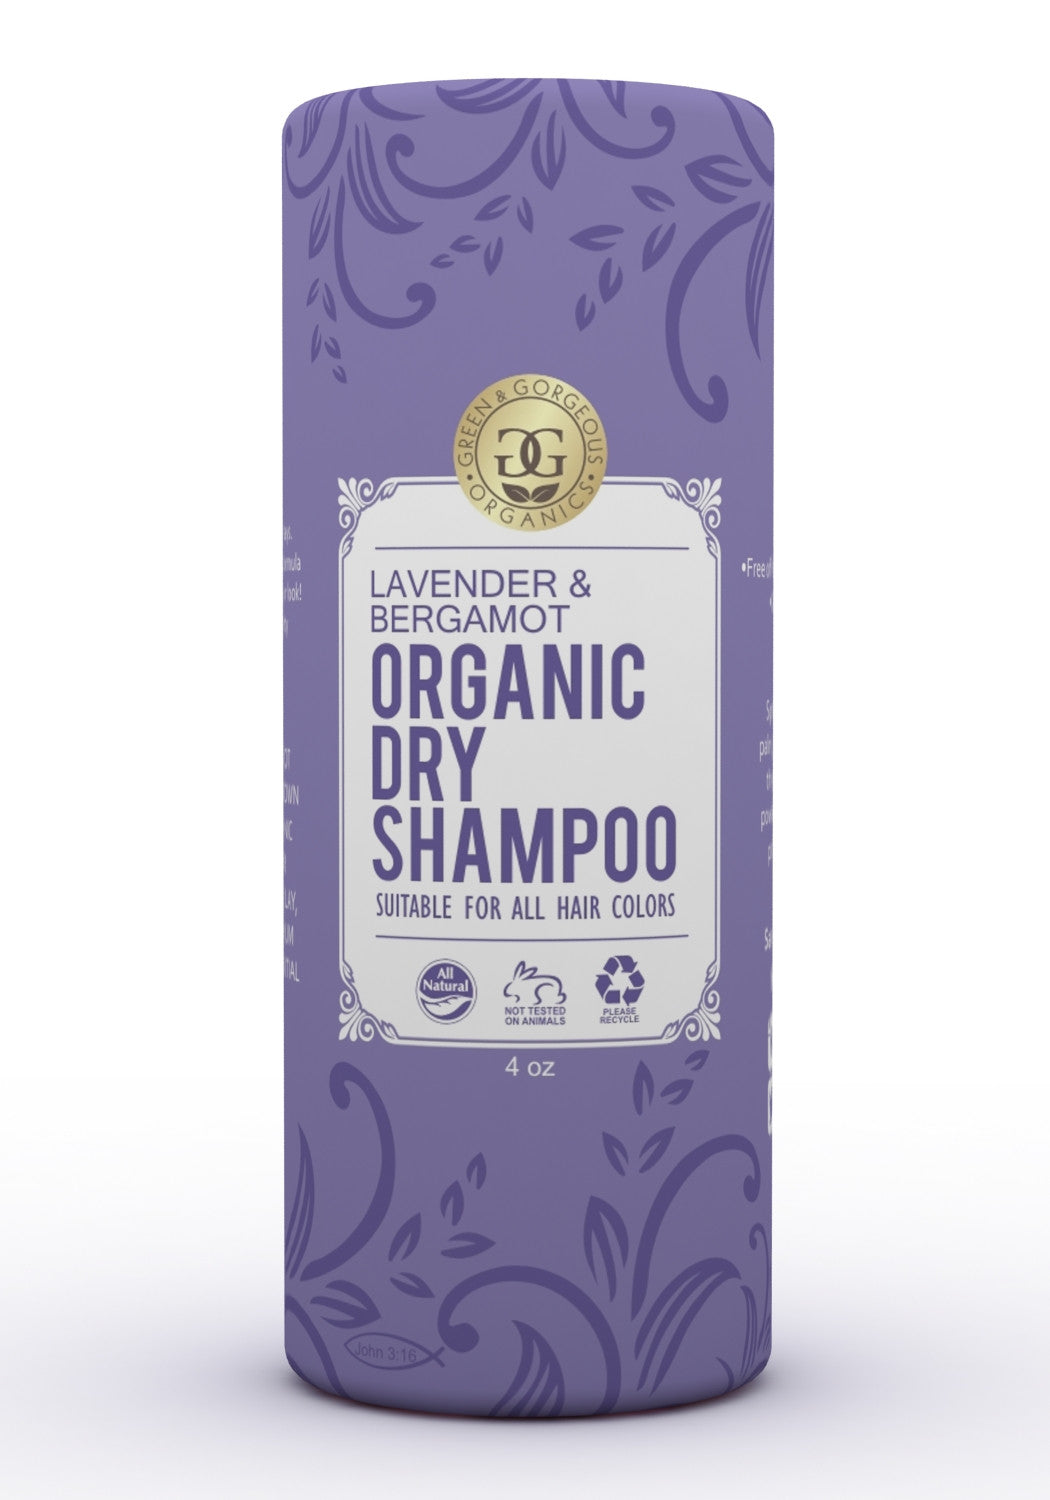 nægte Bliv oppe Kantine Organic Natural Dry Shampoo Powder for All and Oily Hair Types - Laven –  Green & Gorgeous Organics, LLC